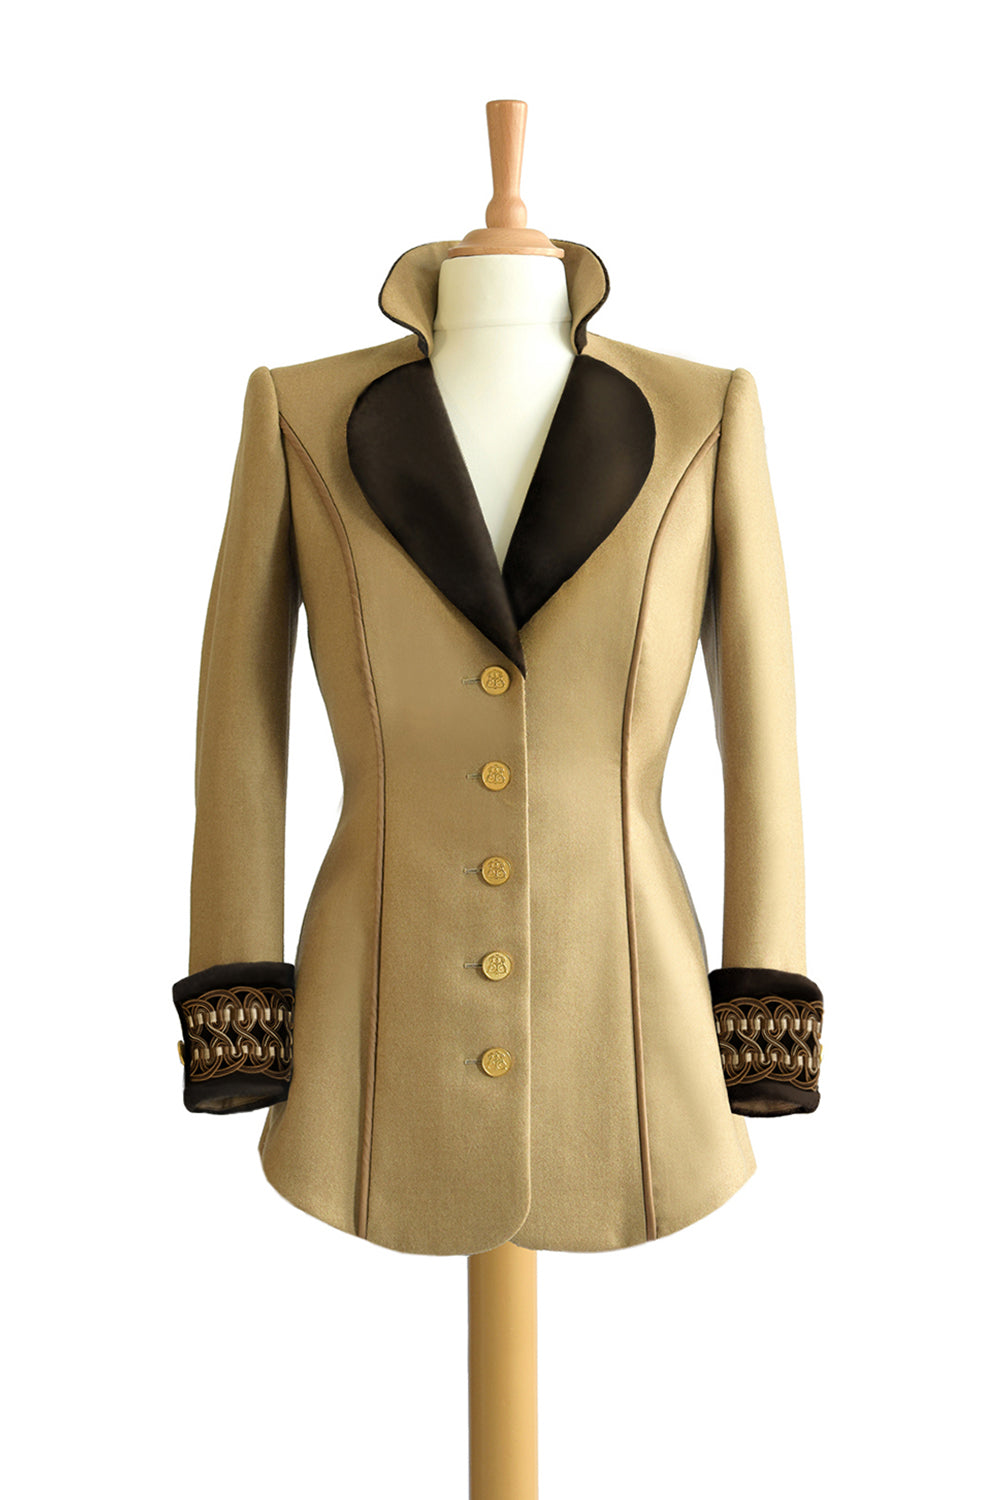 Lawrence No.7 Long Jacket in Camel Tan with Brown Velvet front view